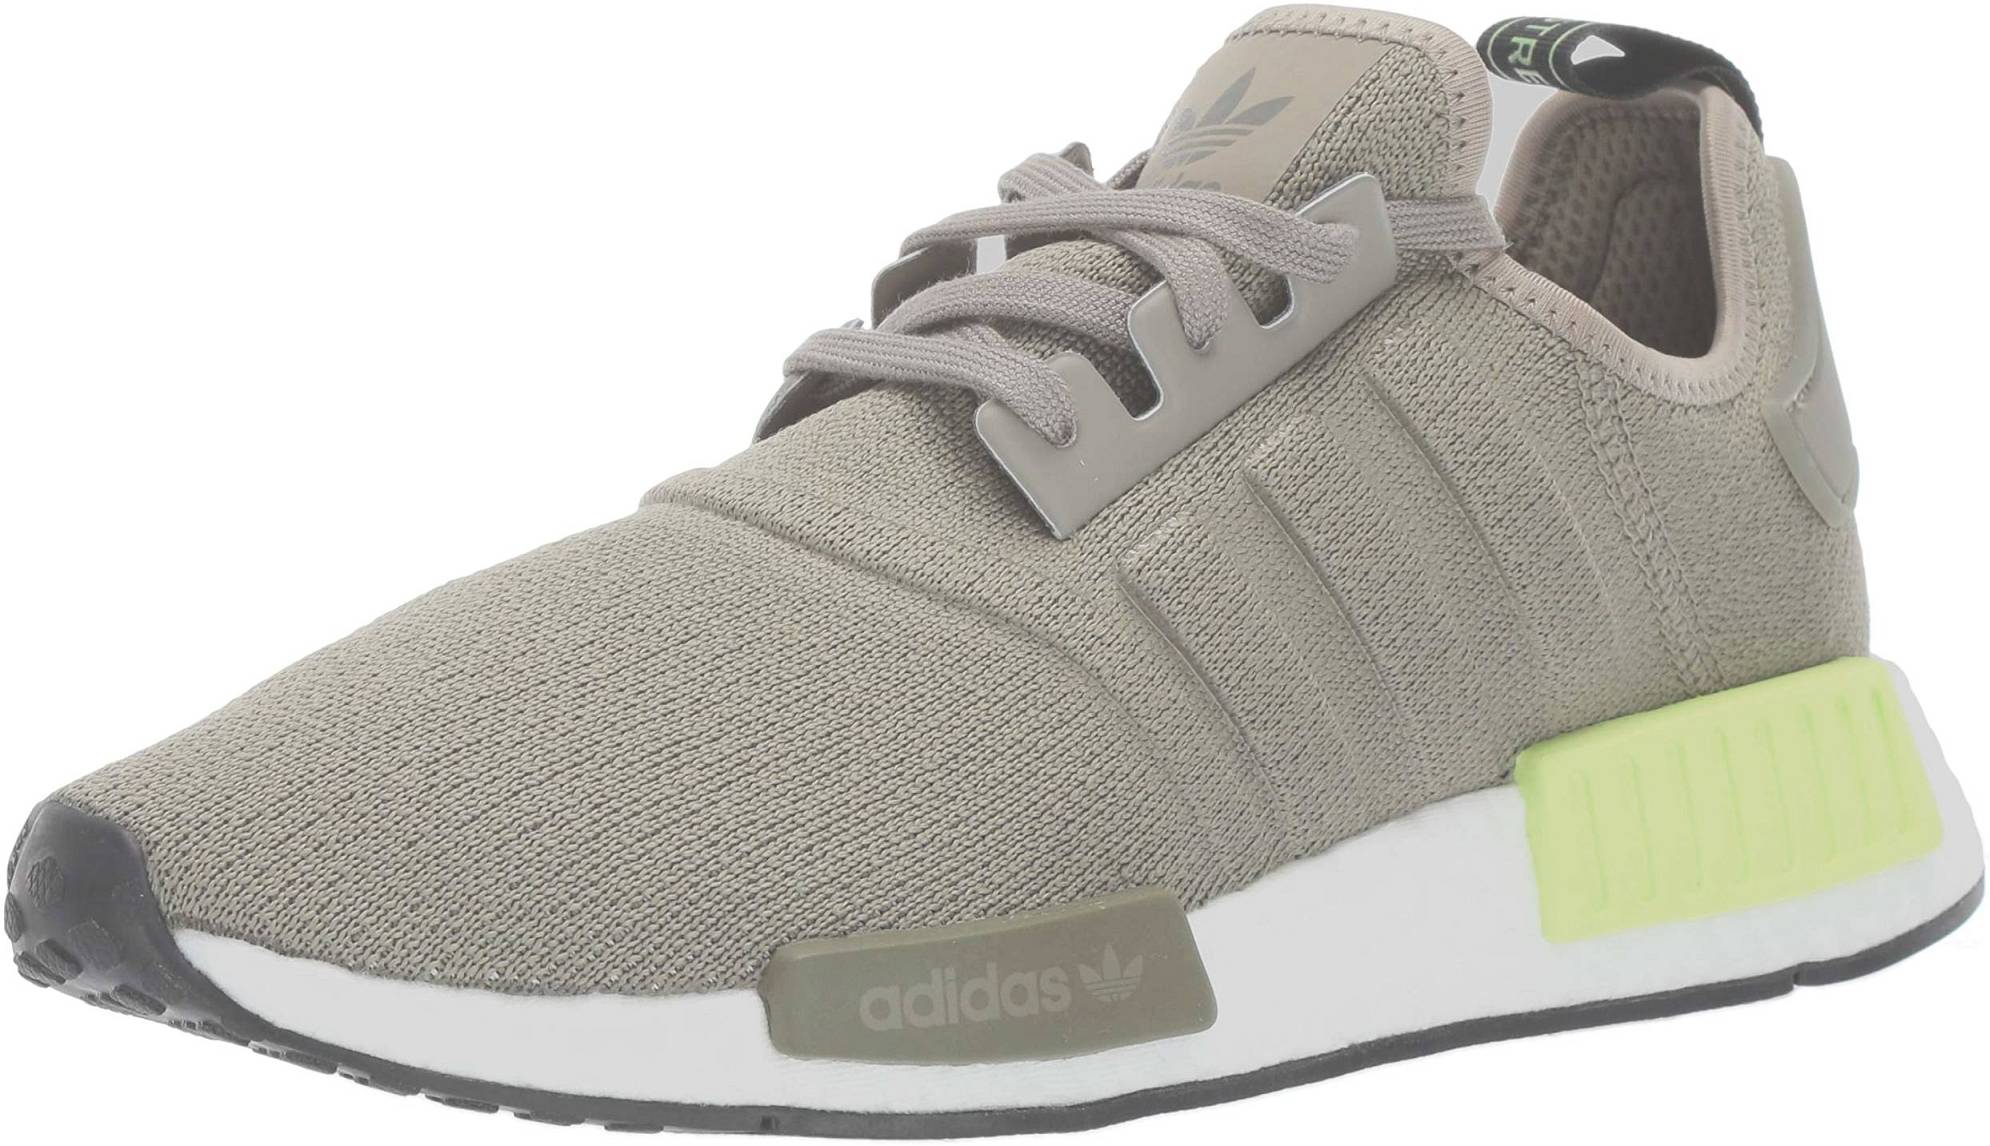 NMD_R1 color